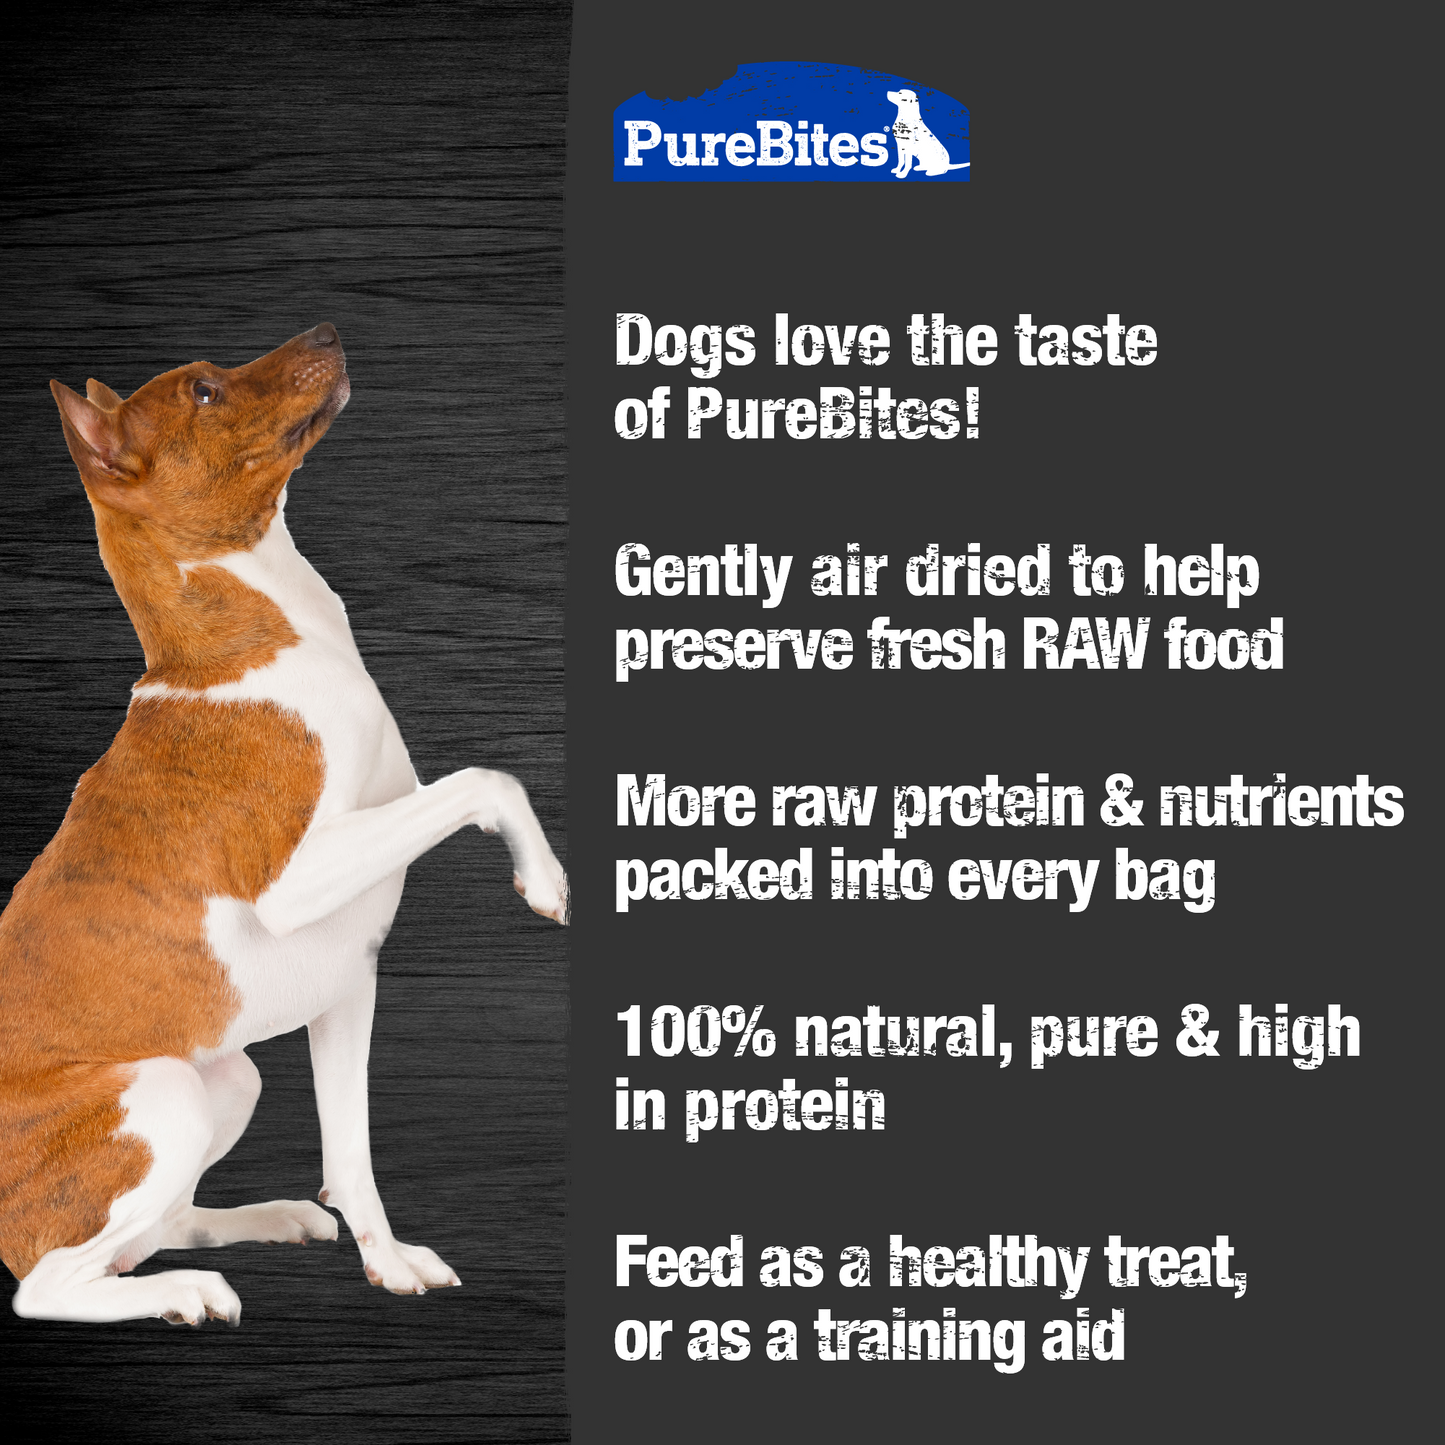 Made fresh & pure means more RAW protein and nutrients packed into every bag. Our cod jerky is delicately air dried to help preserve its RAW taste, and nutrition, and mirror a dog’s ancestral diet.